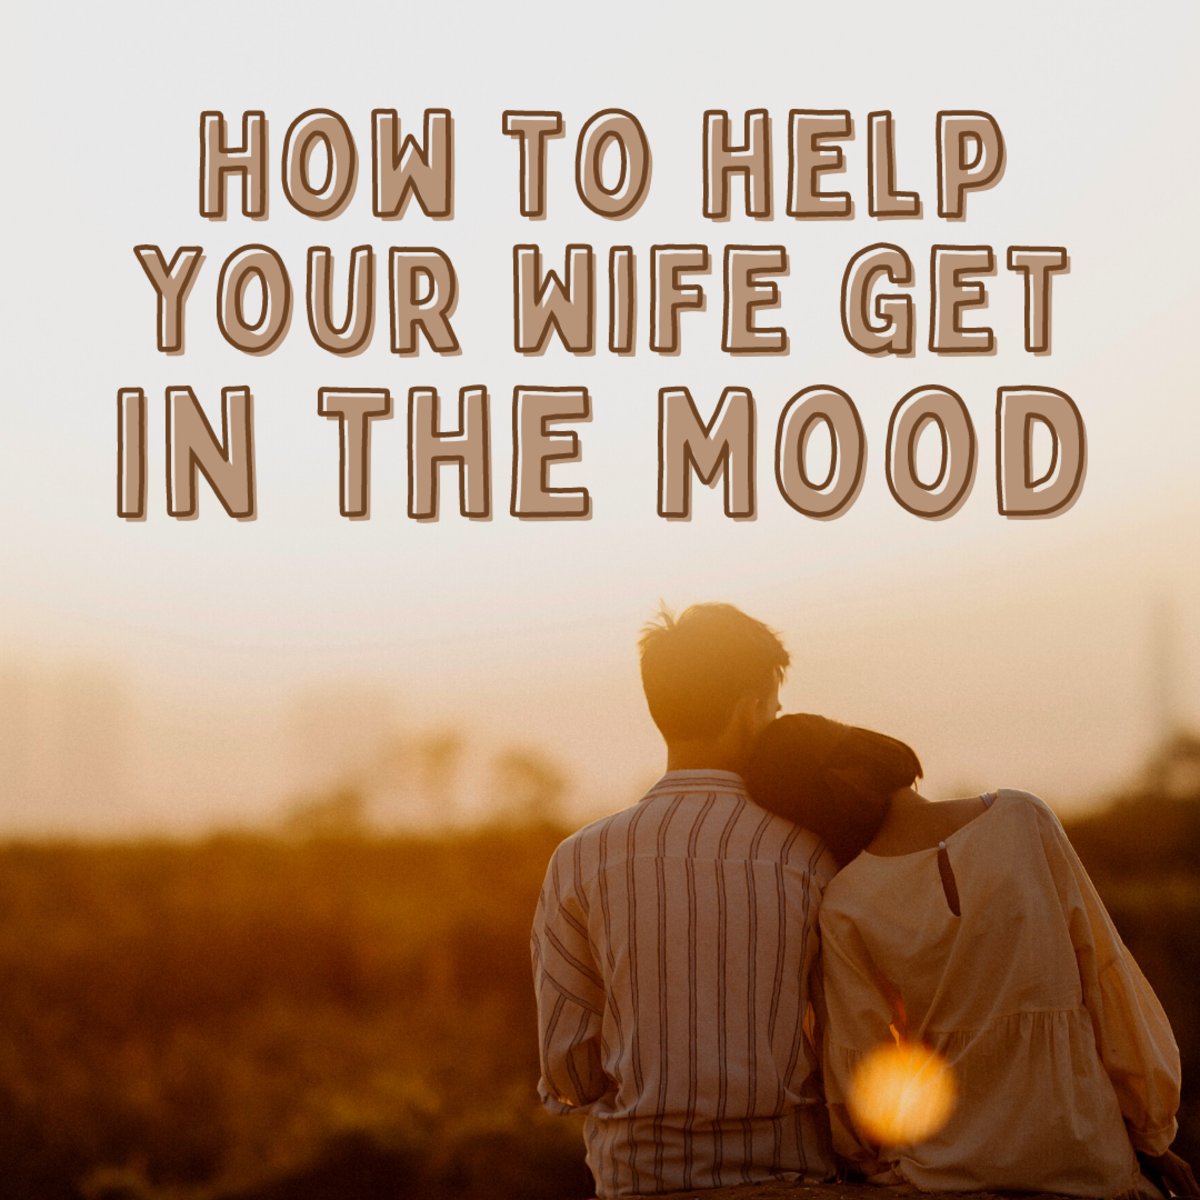 Has your wife been making excuses to avoid physical contact with you lately? Here are some things you can try to help revive the intimacy in your relationship.